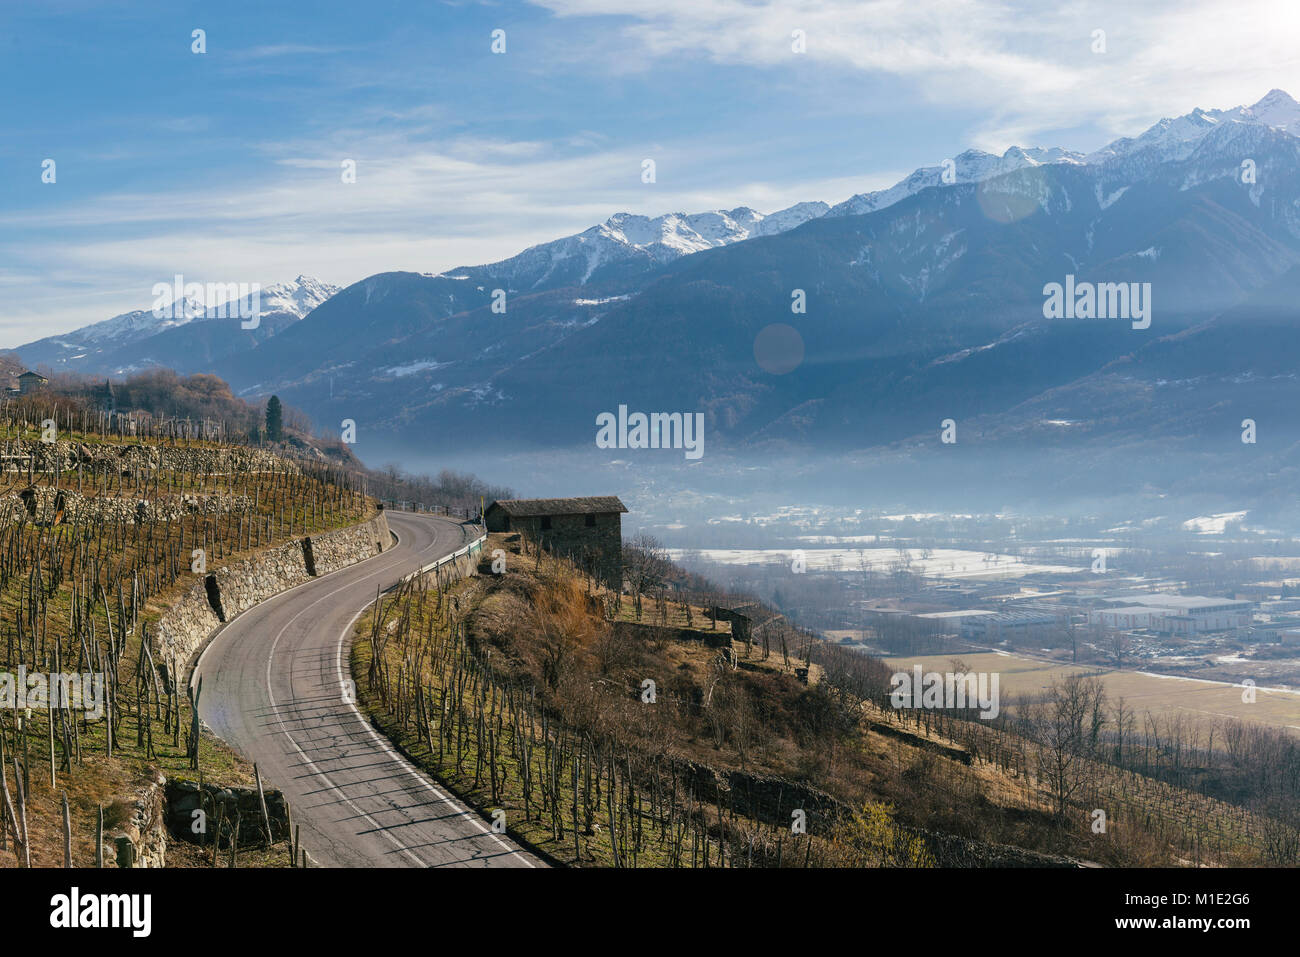 Swerving roads in Valtellina, a valley near Sondrio in the Lombardy region of northern Italy, bordering Switzerland Stock Photo